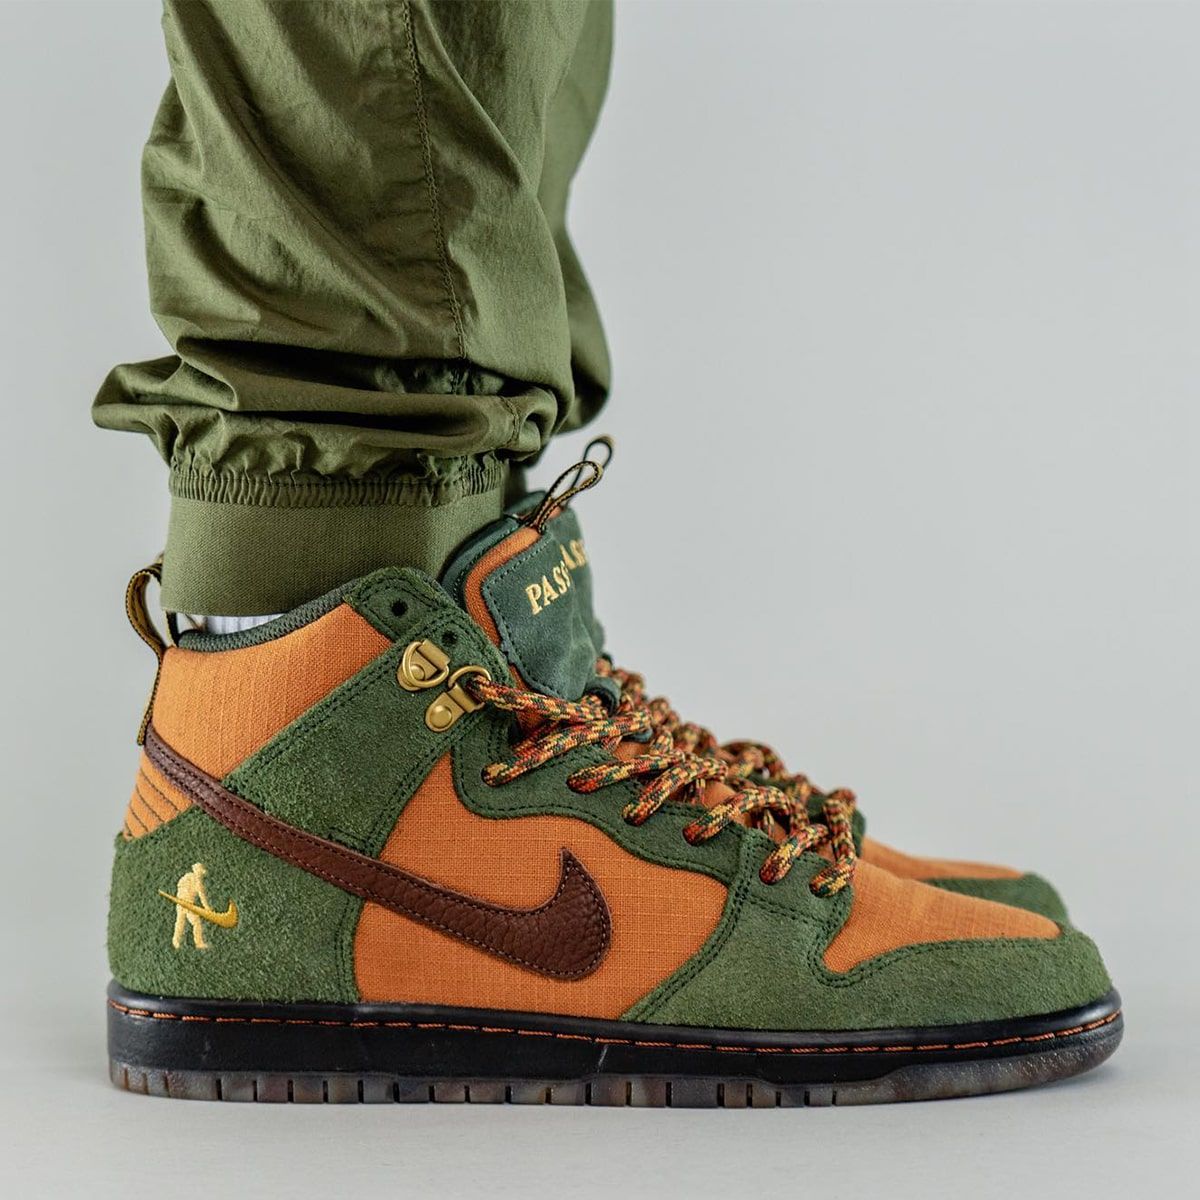 Pass~Port x Nike SB Dunk High Expecting March 5th Release | House ...